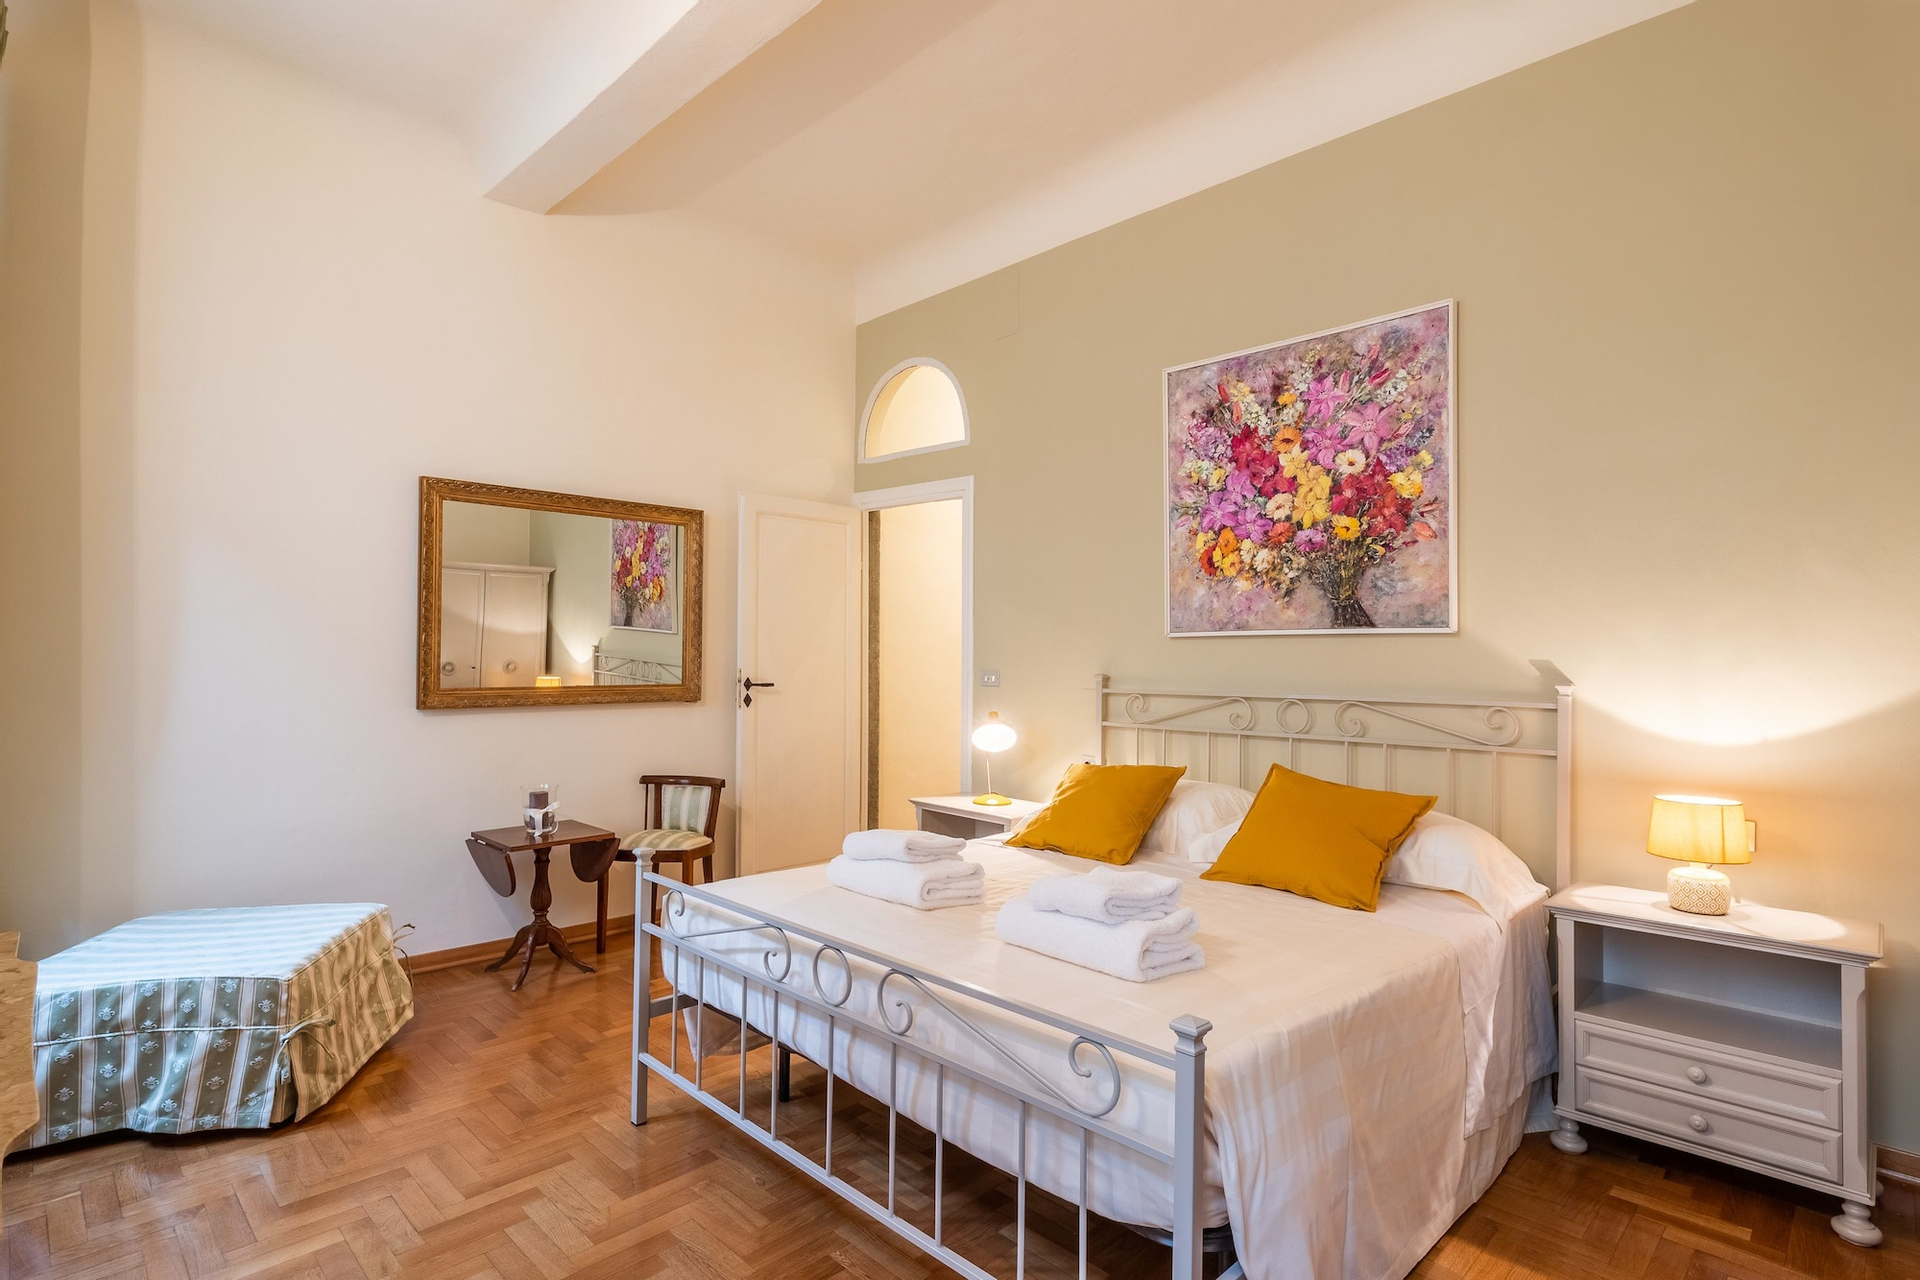 Bedroom 1, The Painter's House in Santa Croce, Florence